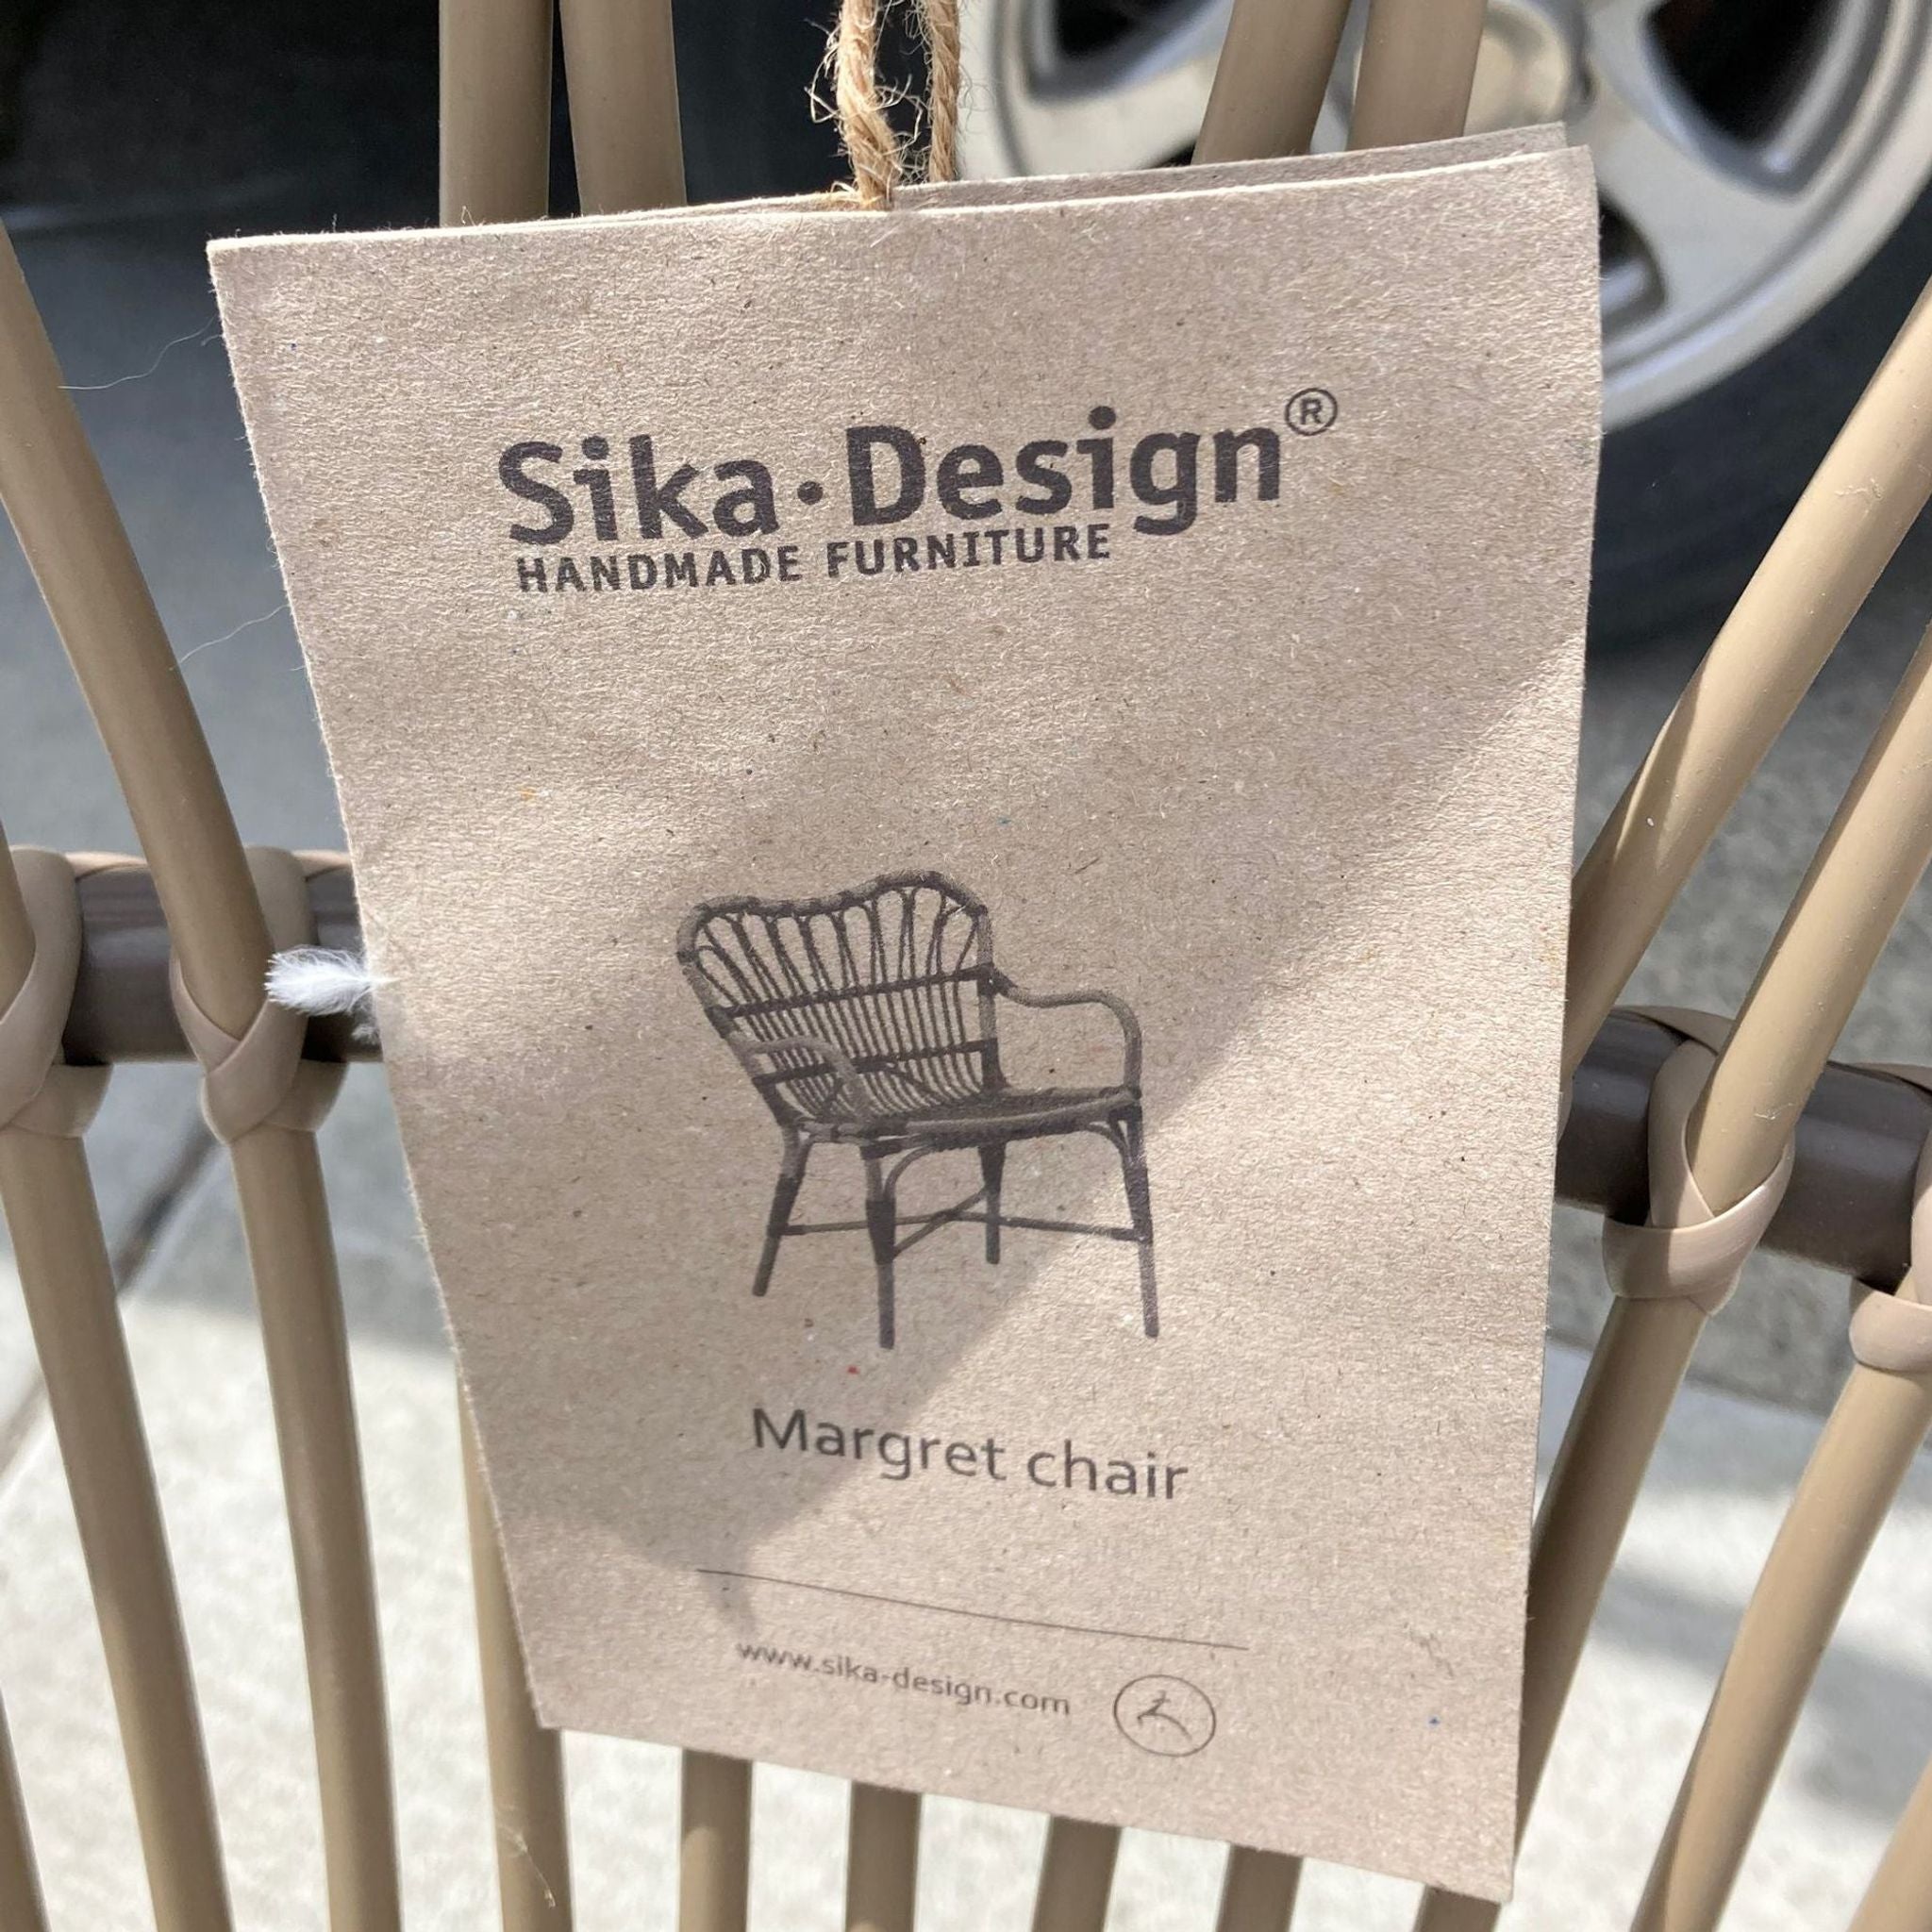 Close-up of a Sika Design tag attached to a Margaret chair, highlighting the brand's handmade furniture and the chair's design name.